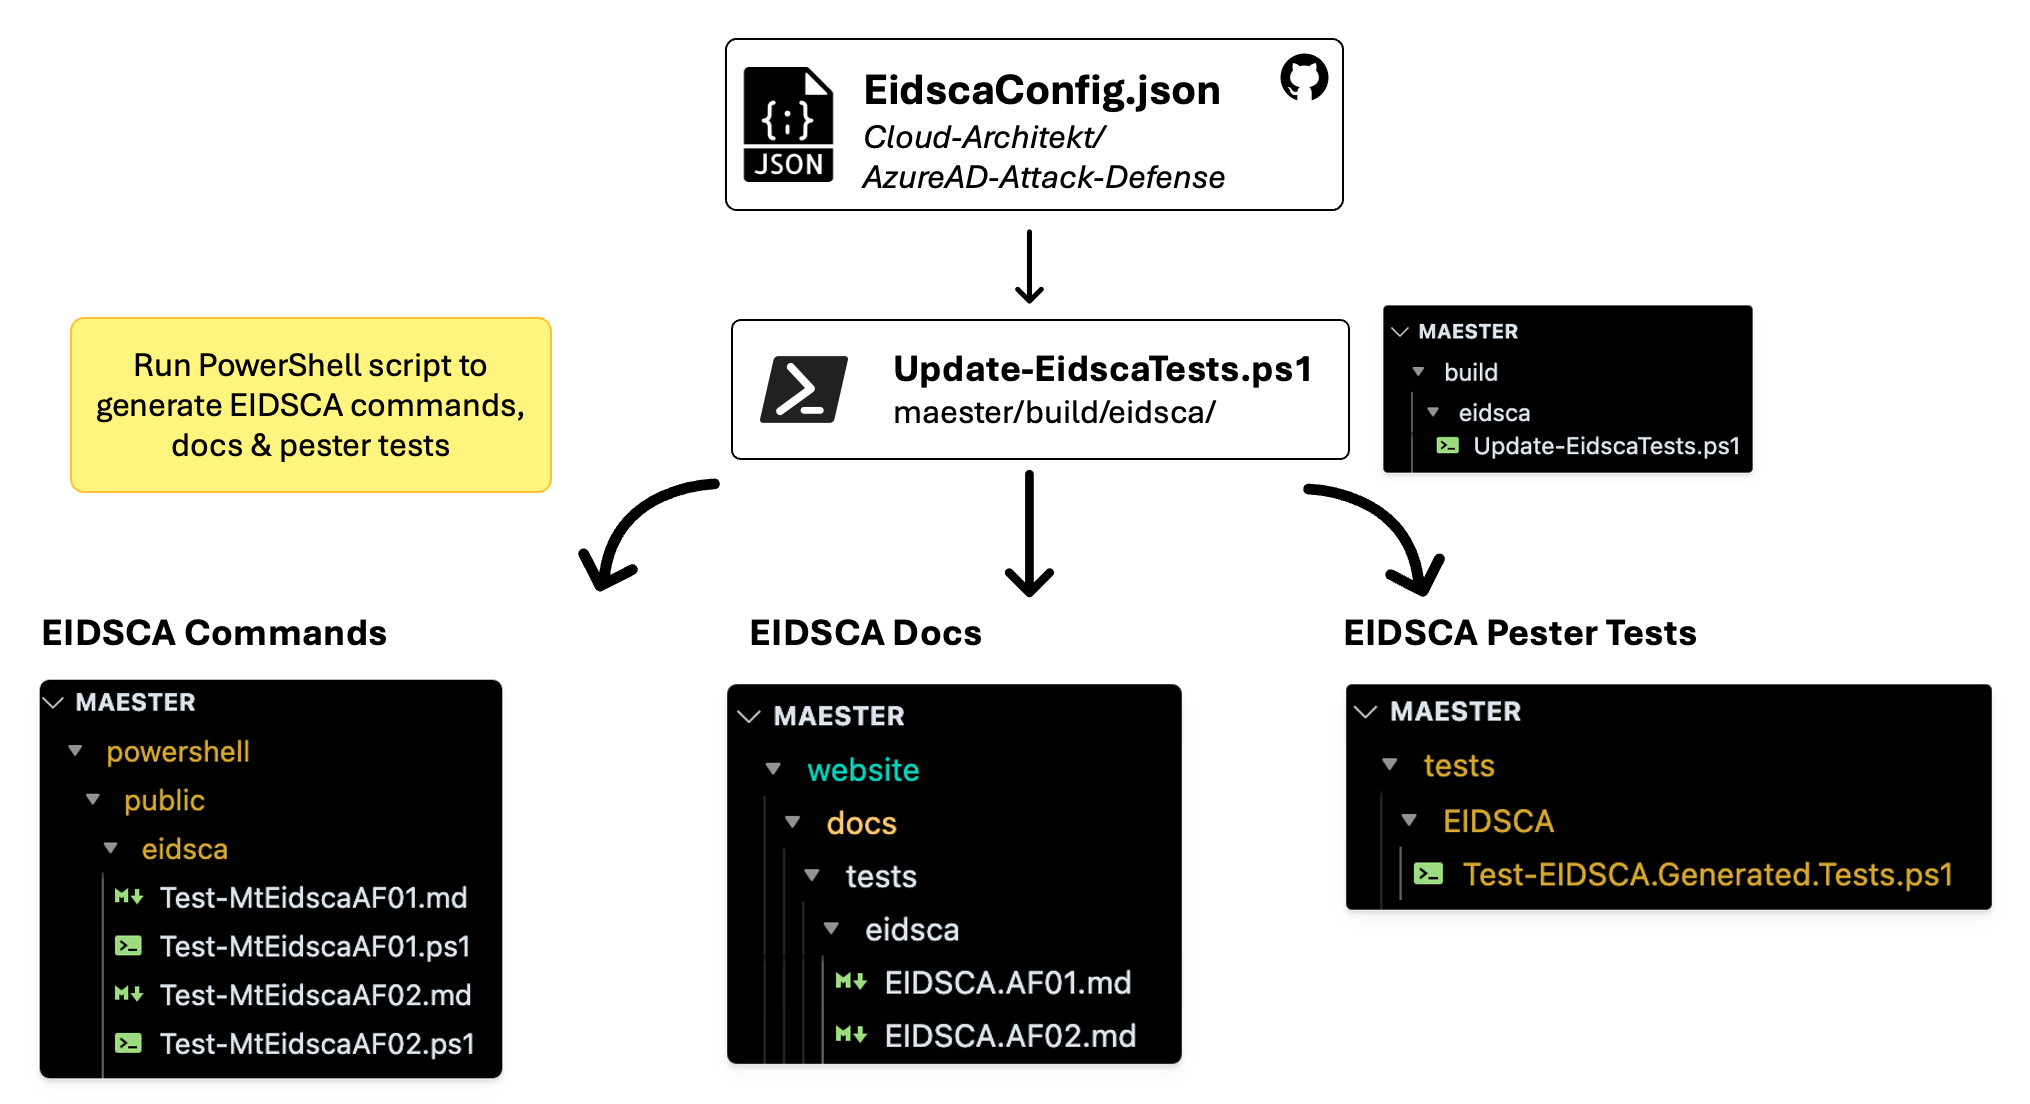 EIDSCA and Maester integration workflow